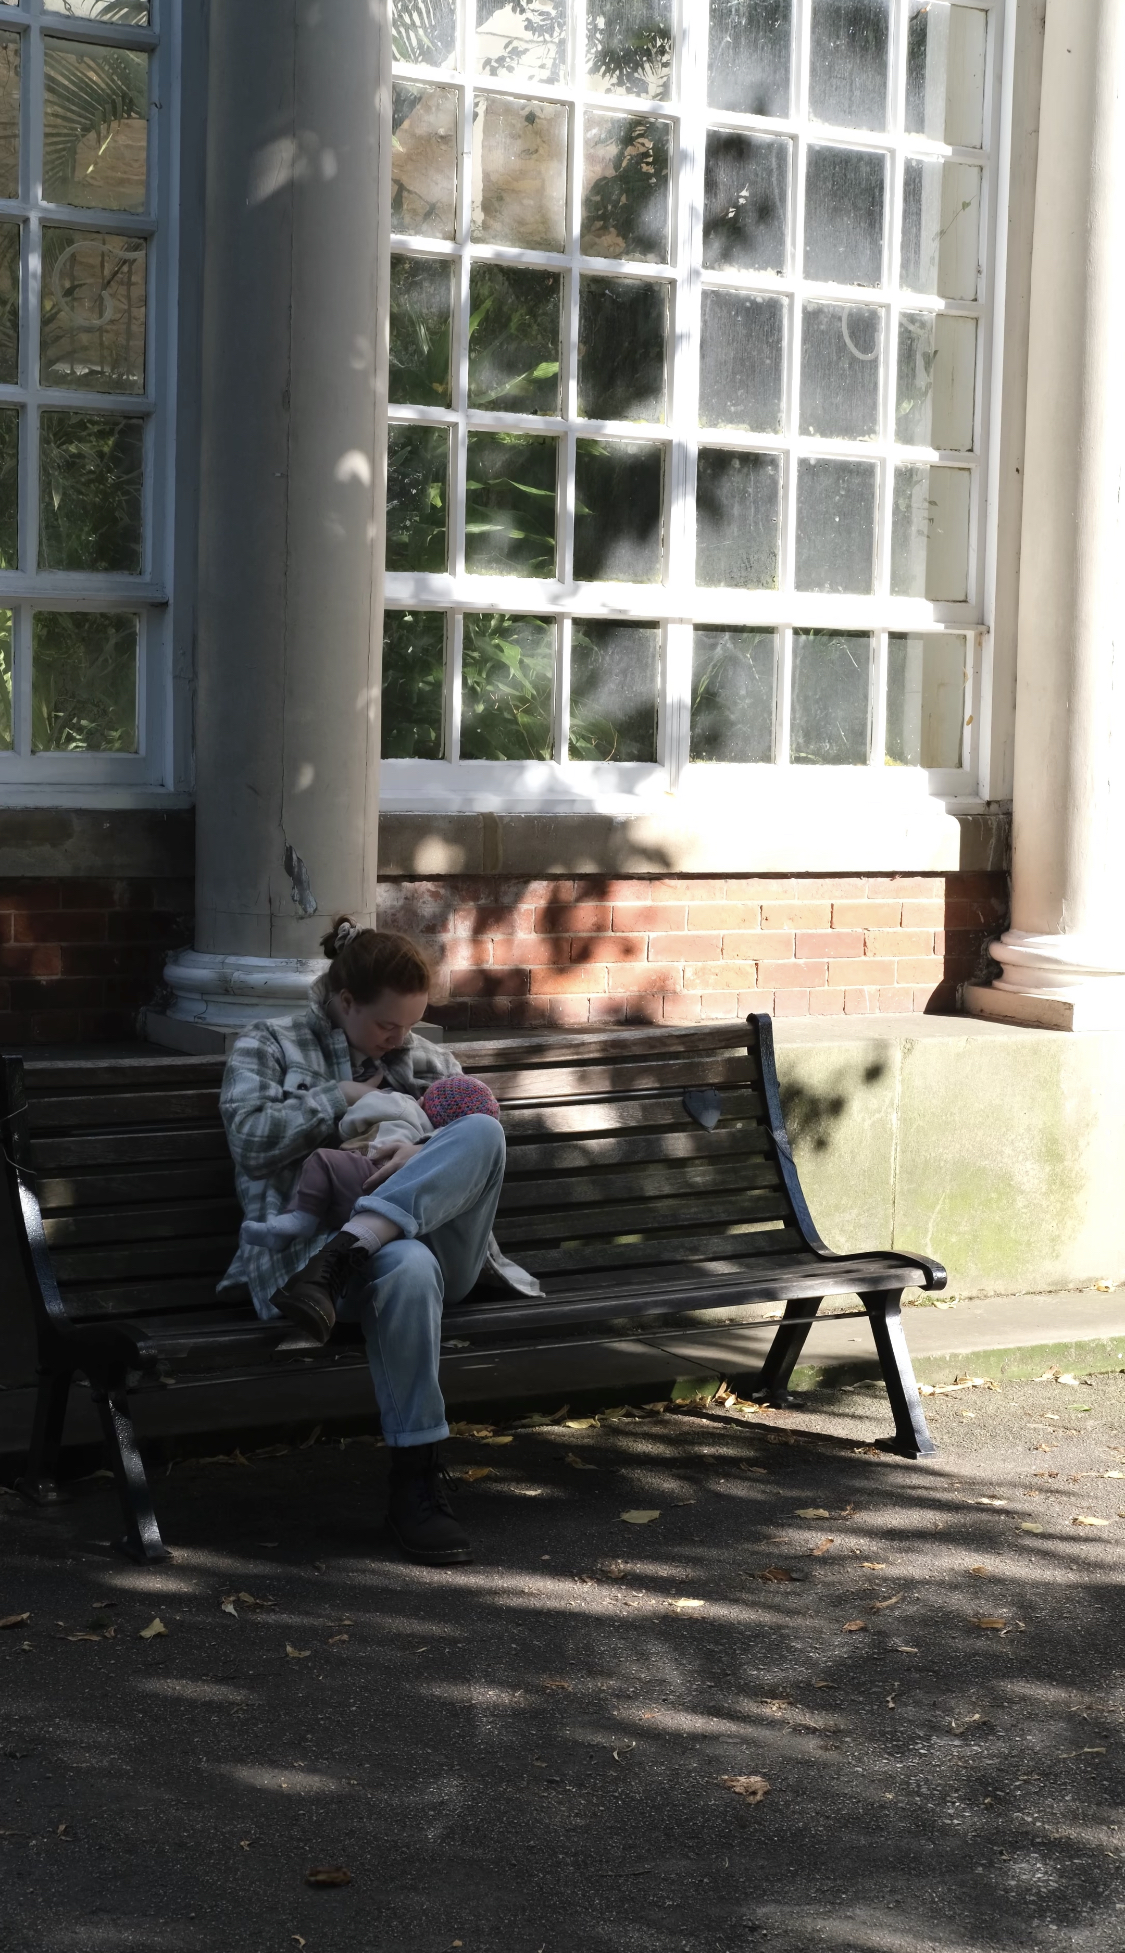 Alice breastfeeding her baby outside on a bench